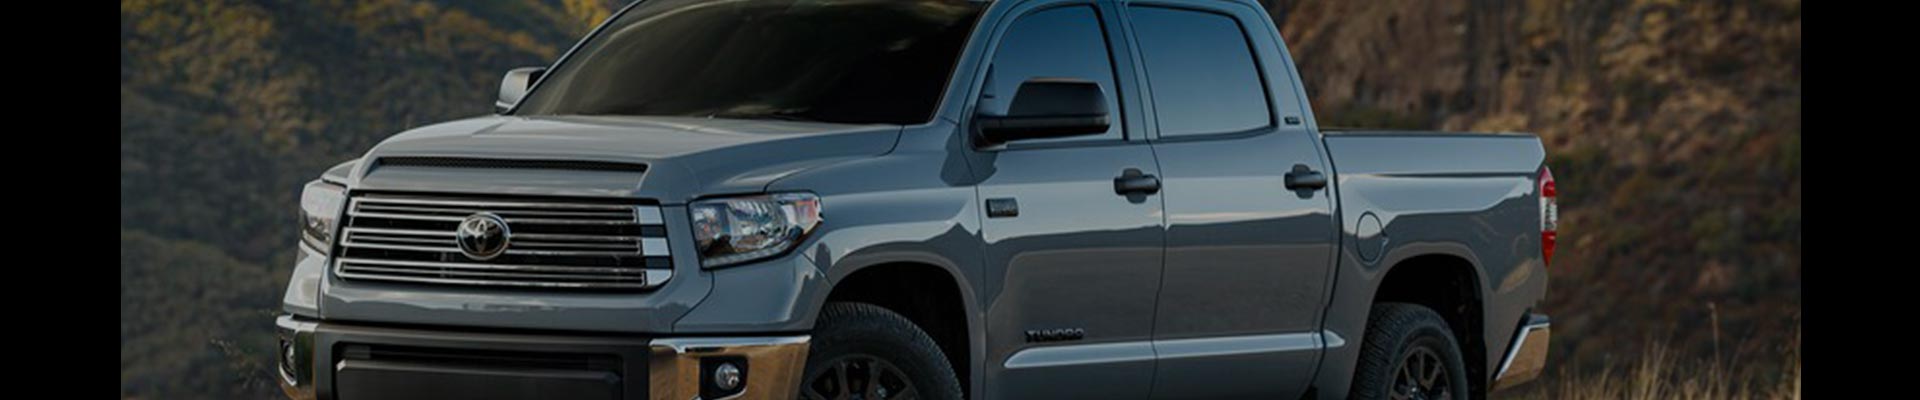 Shop Replacement and OEM 2005 Toyota Tundra Parts with Discounted Price on the Net